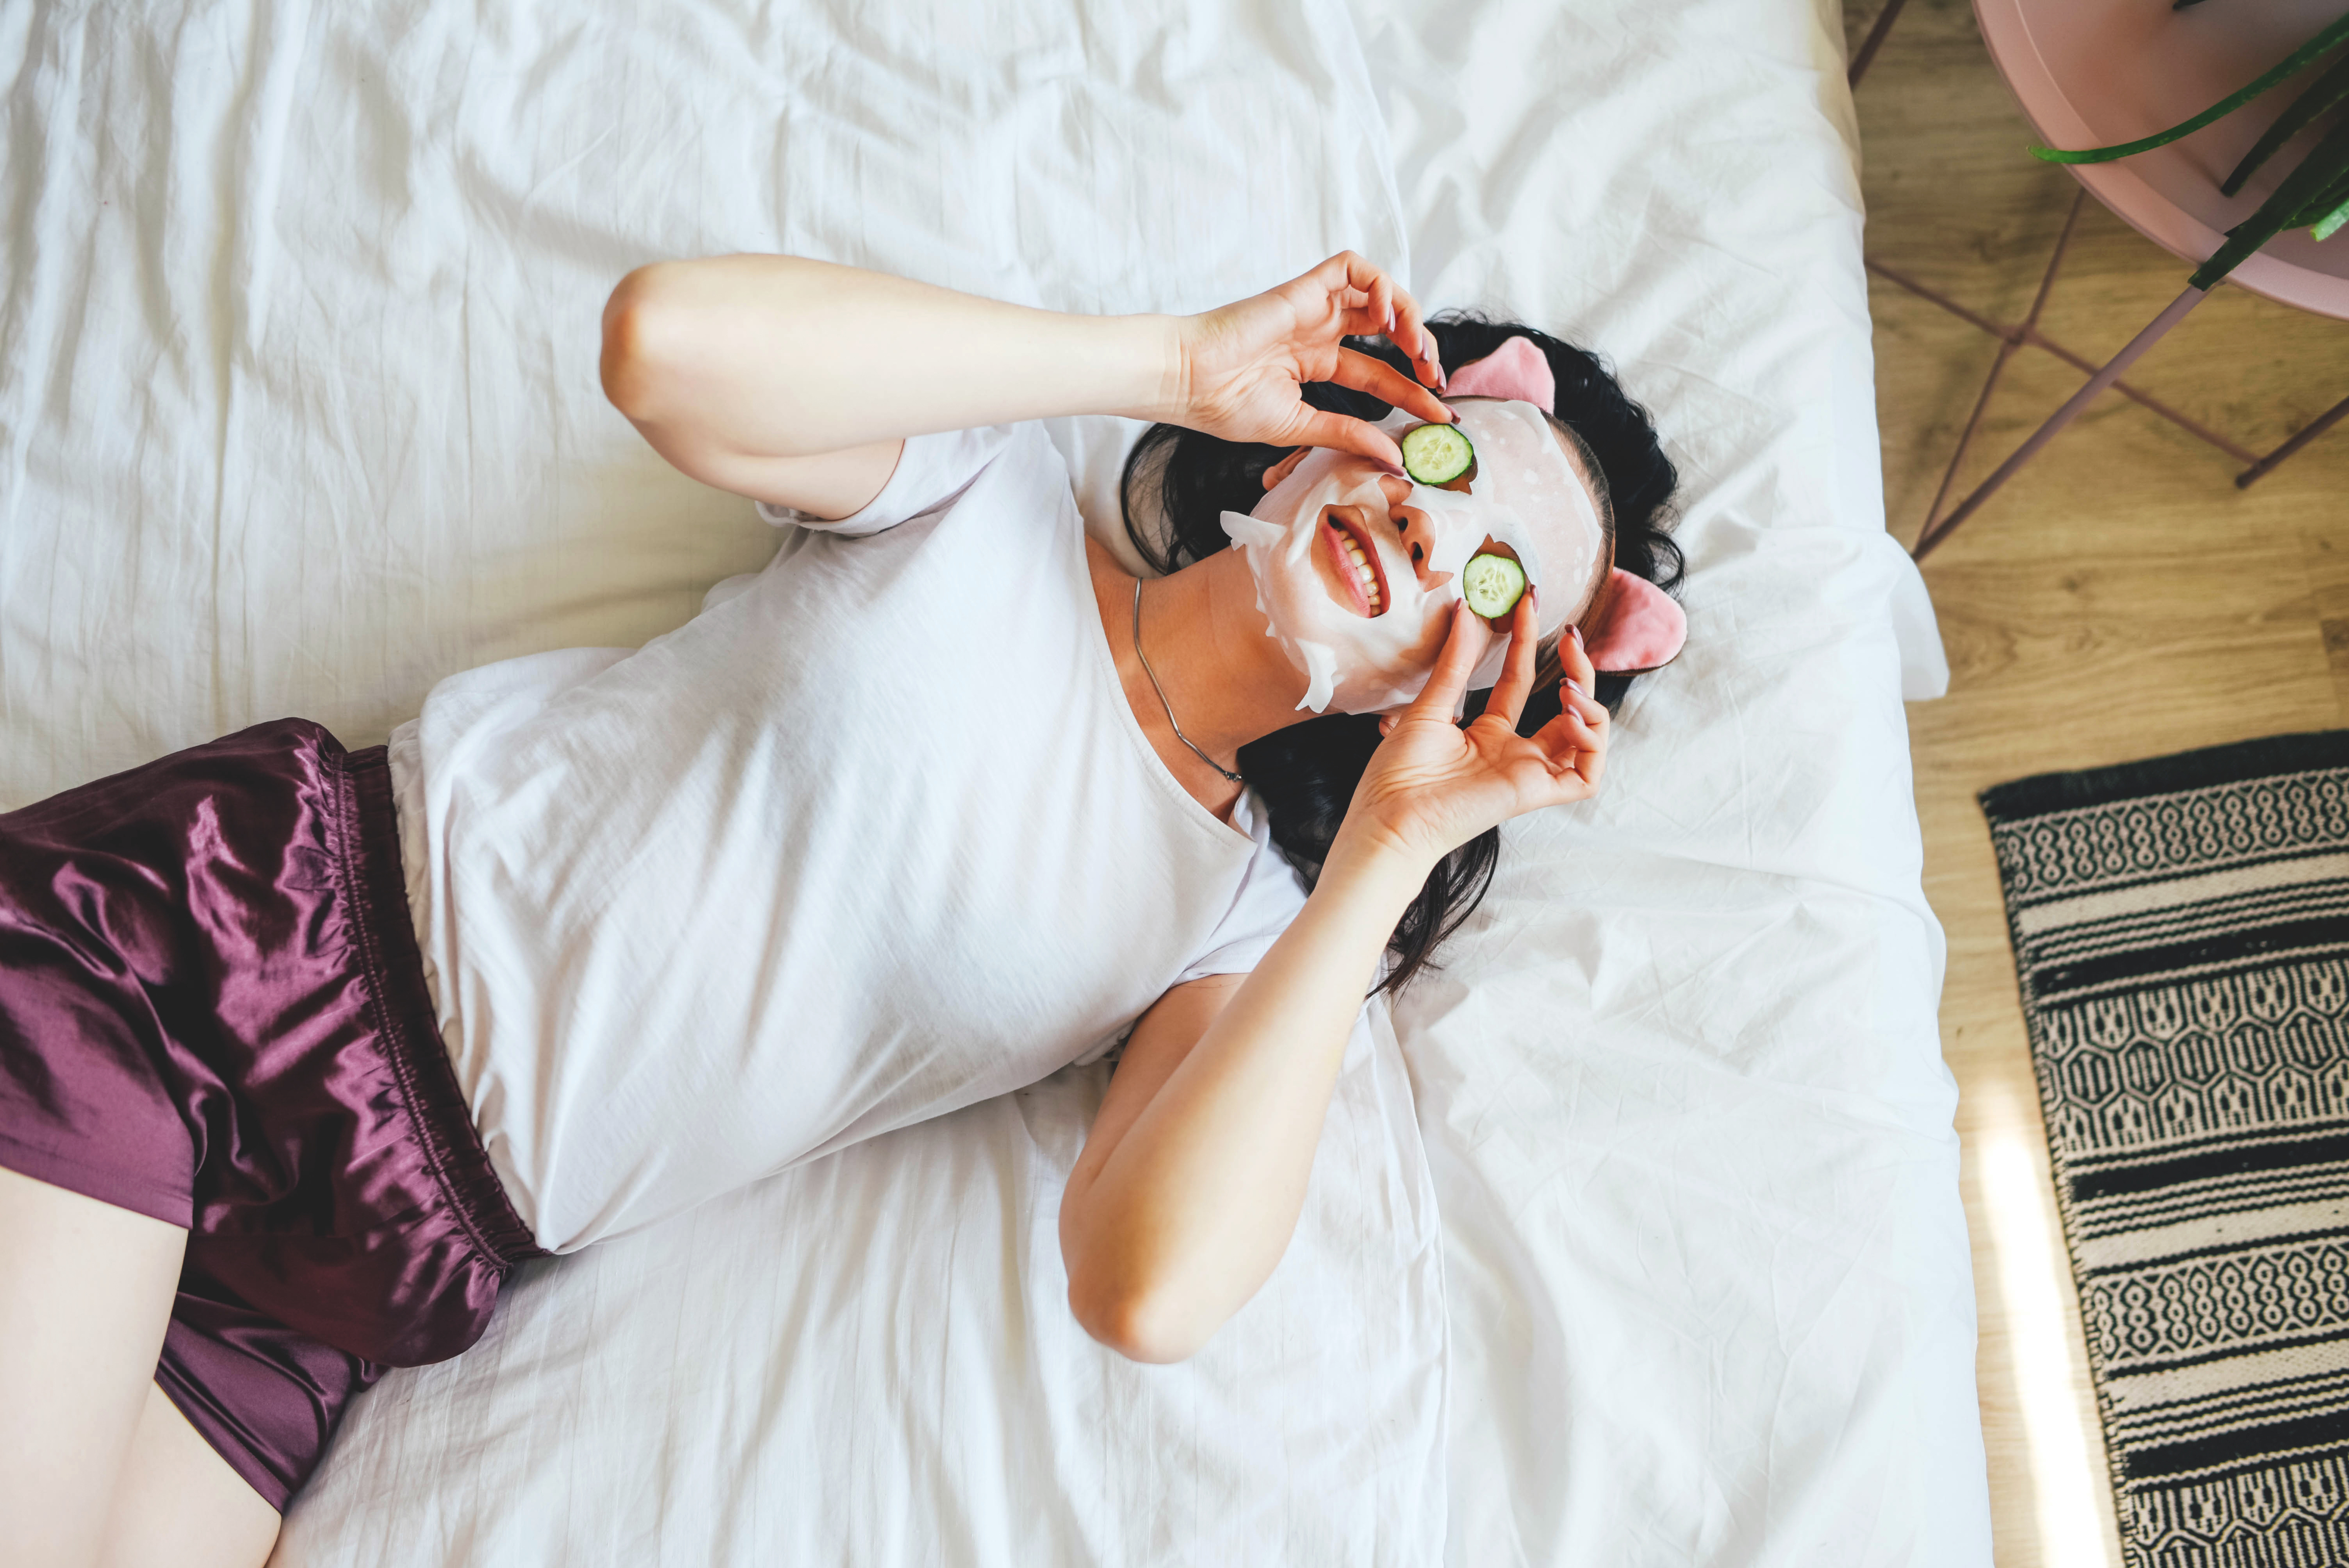 A woman with a face mask on and cucumber slices on her eyes while lying in bed